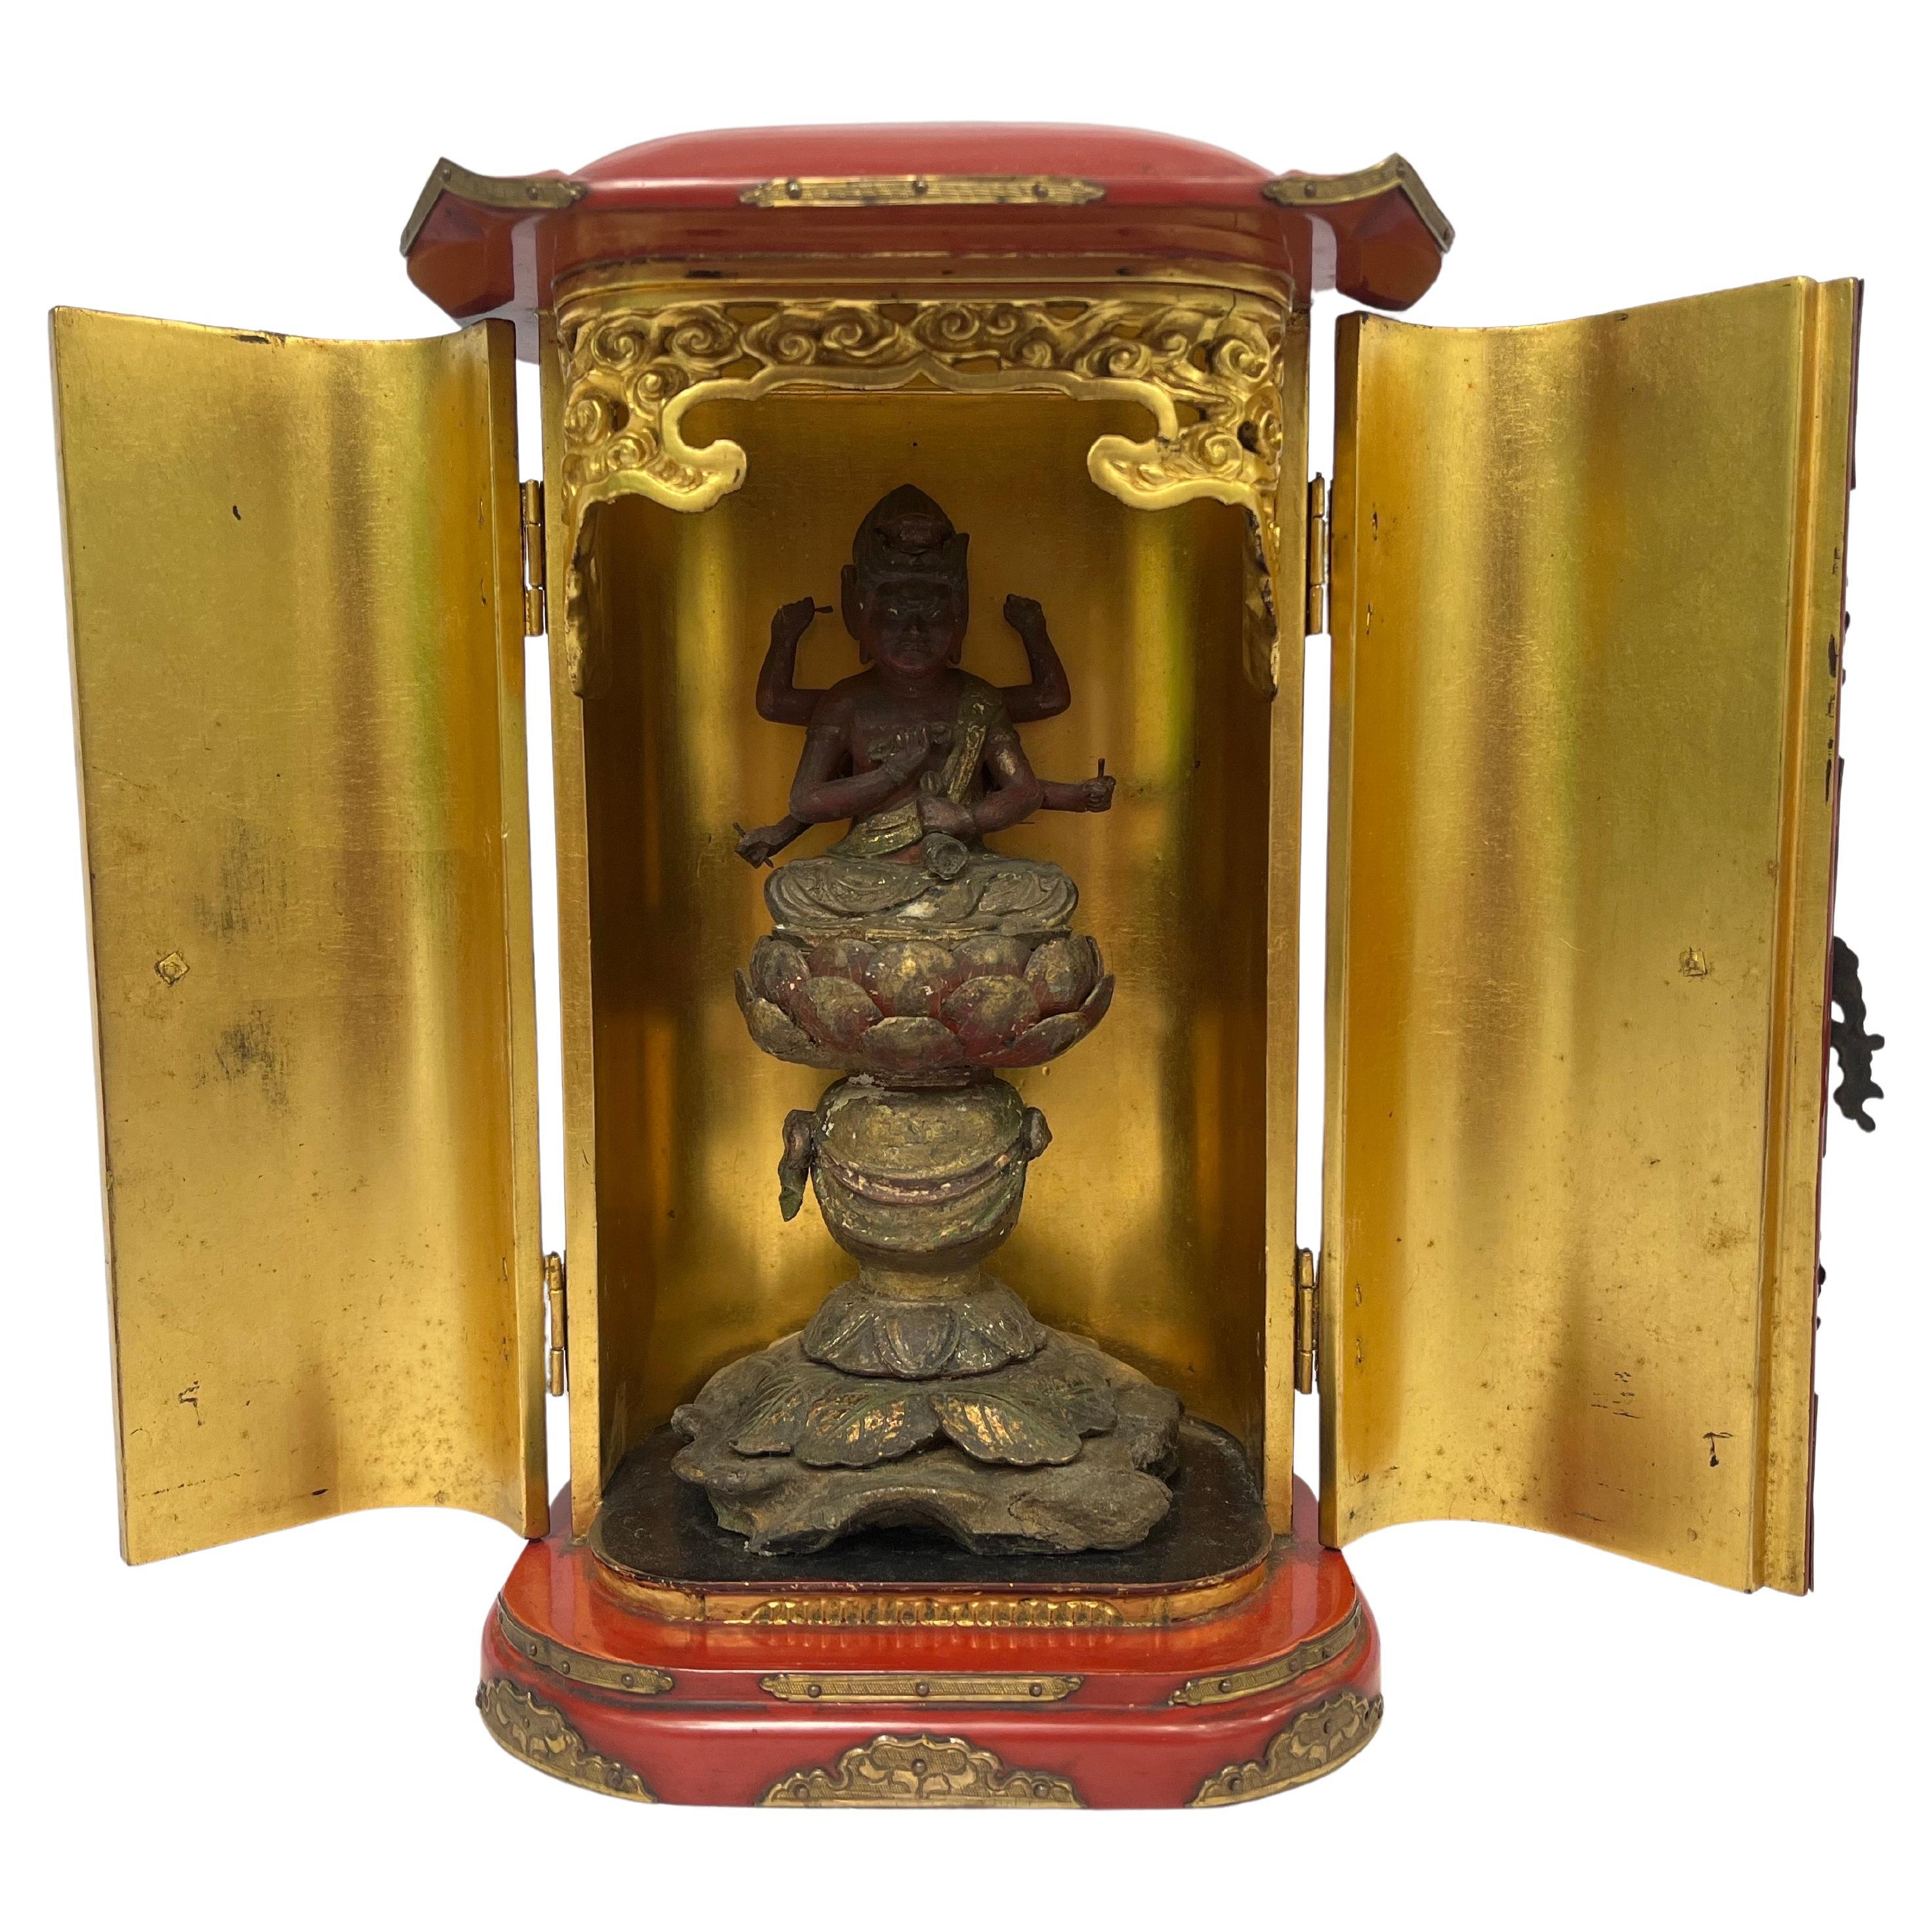 Antique Japanese Traveling Altar Aizen Myoo or Ragaraja King of Wisdom Funno Son For Sale